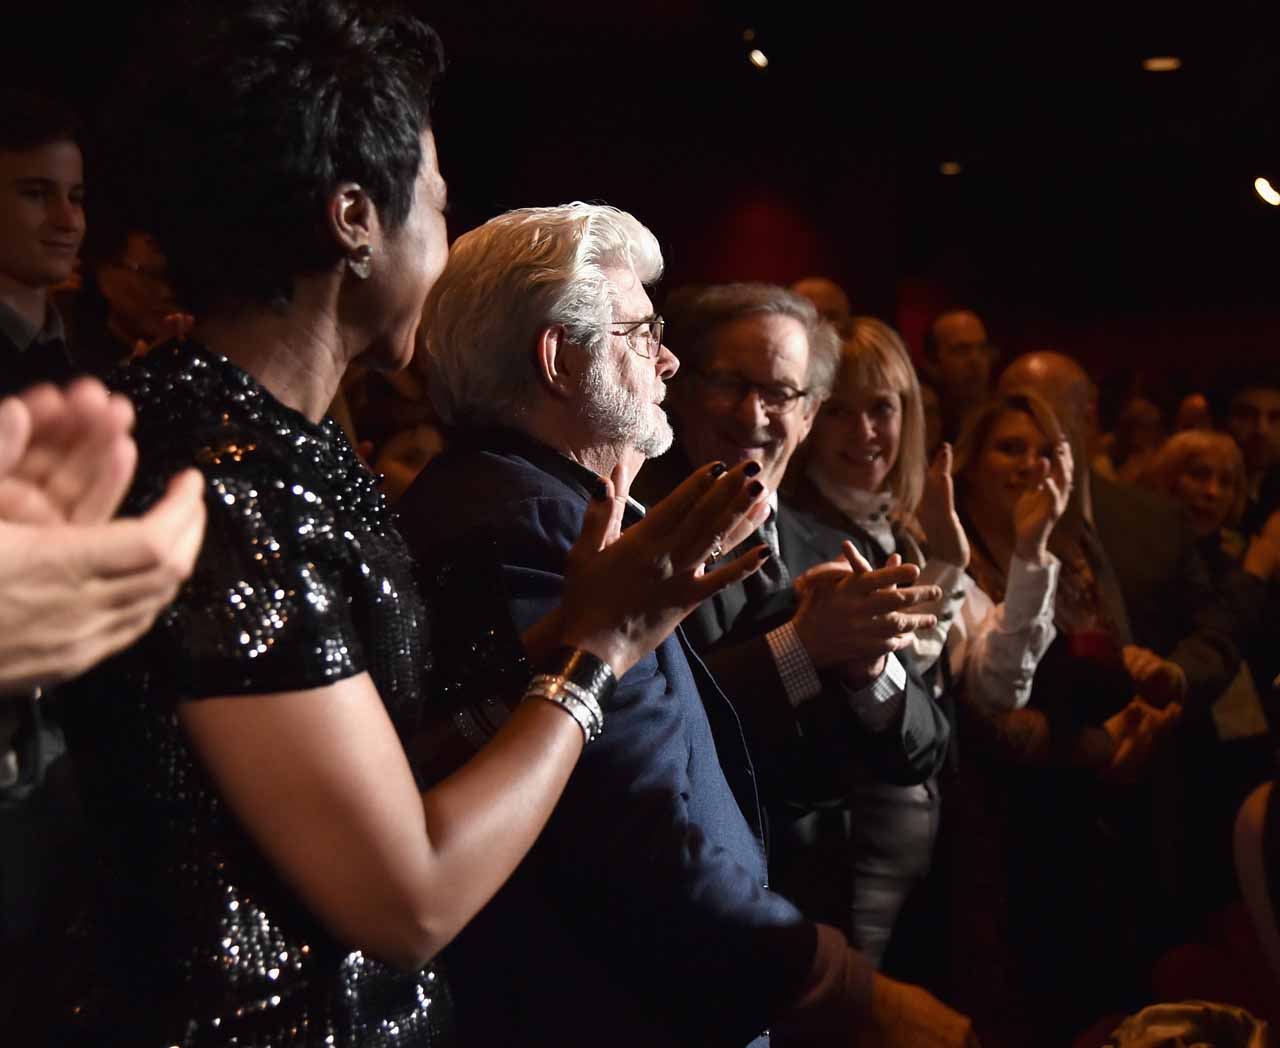 HOLLYWOOD, CA - DECEMBER 14: (L-R) Directors George Lucas (L) and Steven Spielberg attend the World Premiere of ?Star Wars: The Force Awakens? at the Dolby, El Capitan, and TCL Theatres on December 14, 2015 in Hollywood, California.  (Photo by Alberto E. Rodriguez/Getty Images for Disney) *** Local Caption *** George Lucas;Steven Spielberg